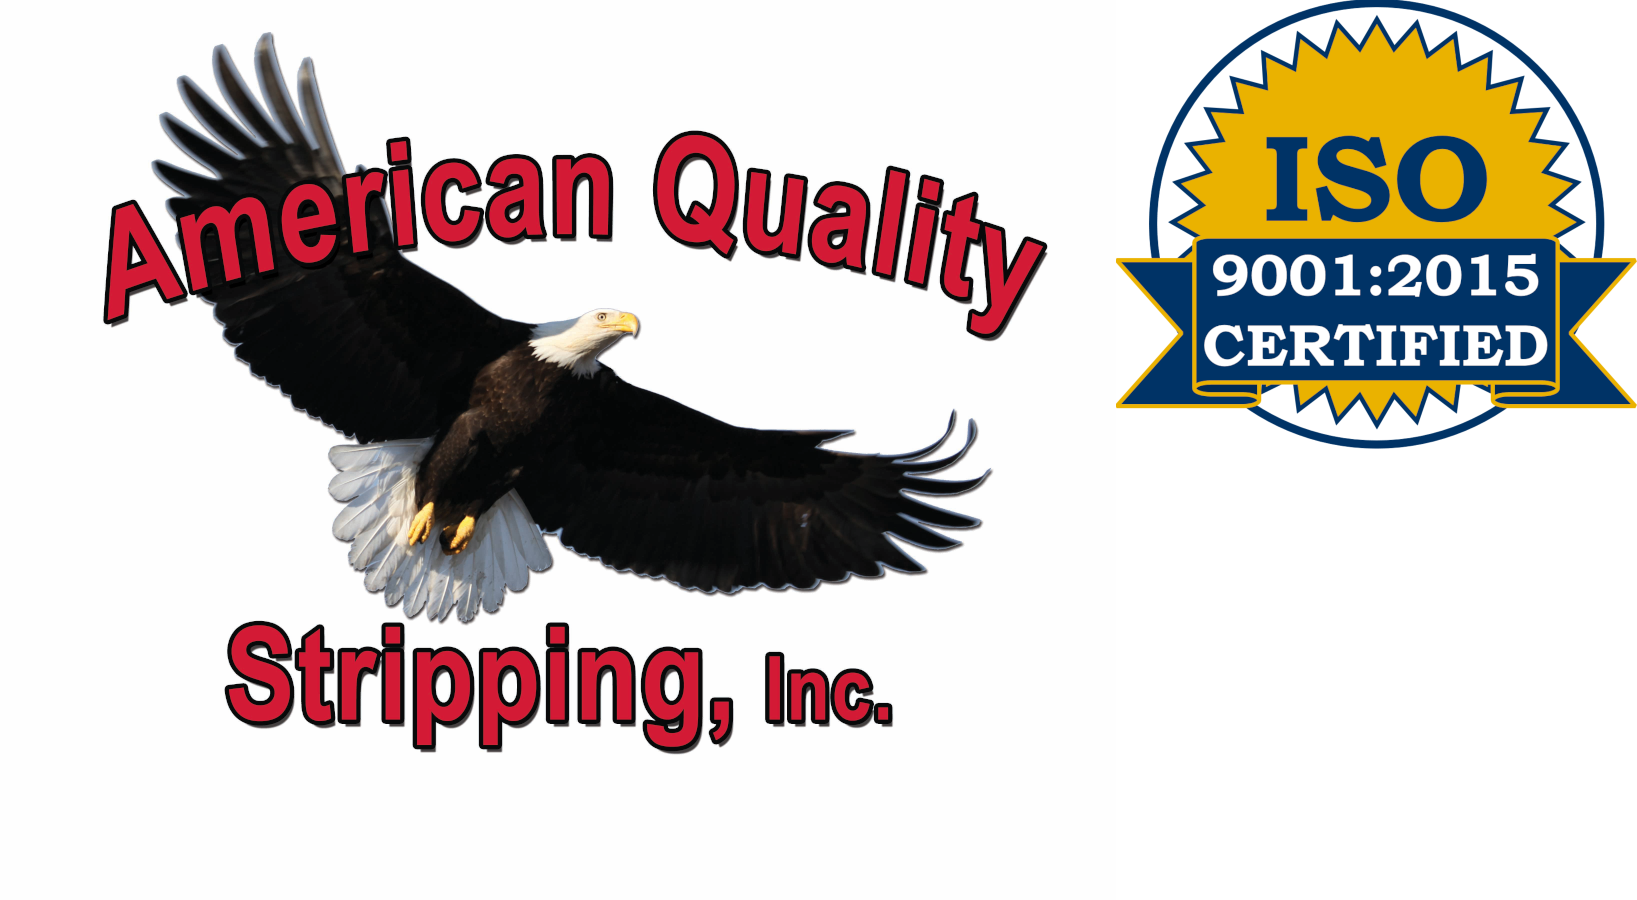 americanqualitystripping.com-Logo_with_ISO-9001-2015-Certified-Stamp